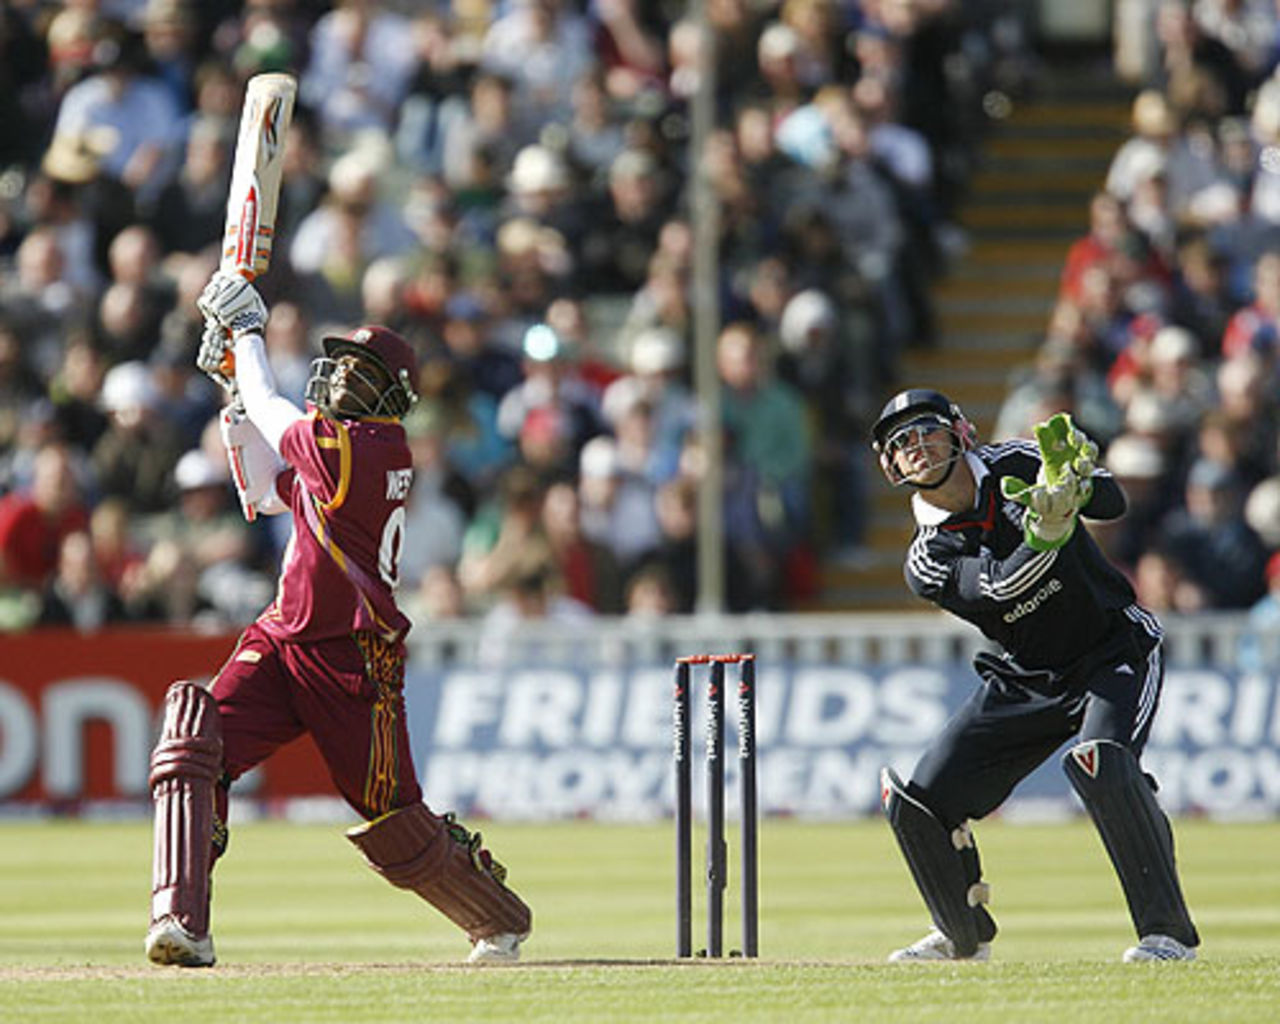 Shivnarine Chanderpaul takes the aerial route during his 68 from 108 balls, England v West Indies, 3rd ODI, Edgbaston, May 26, 2009